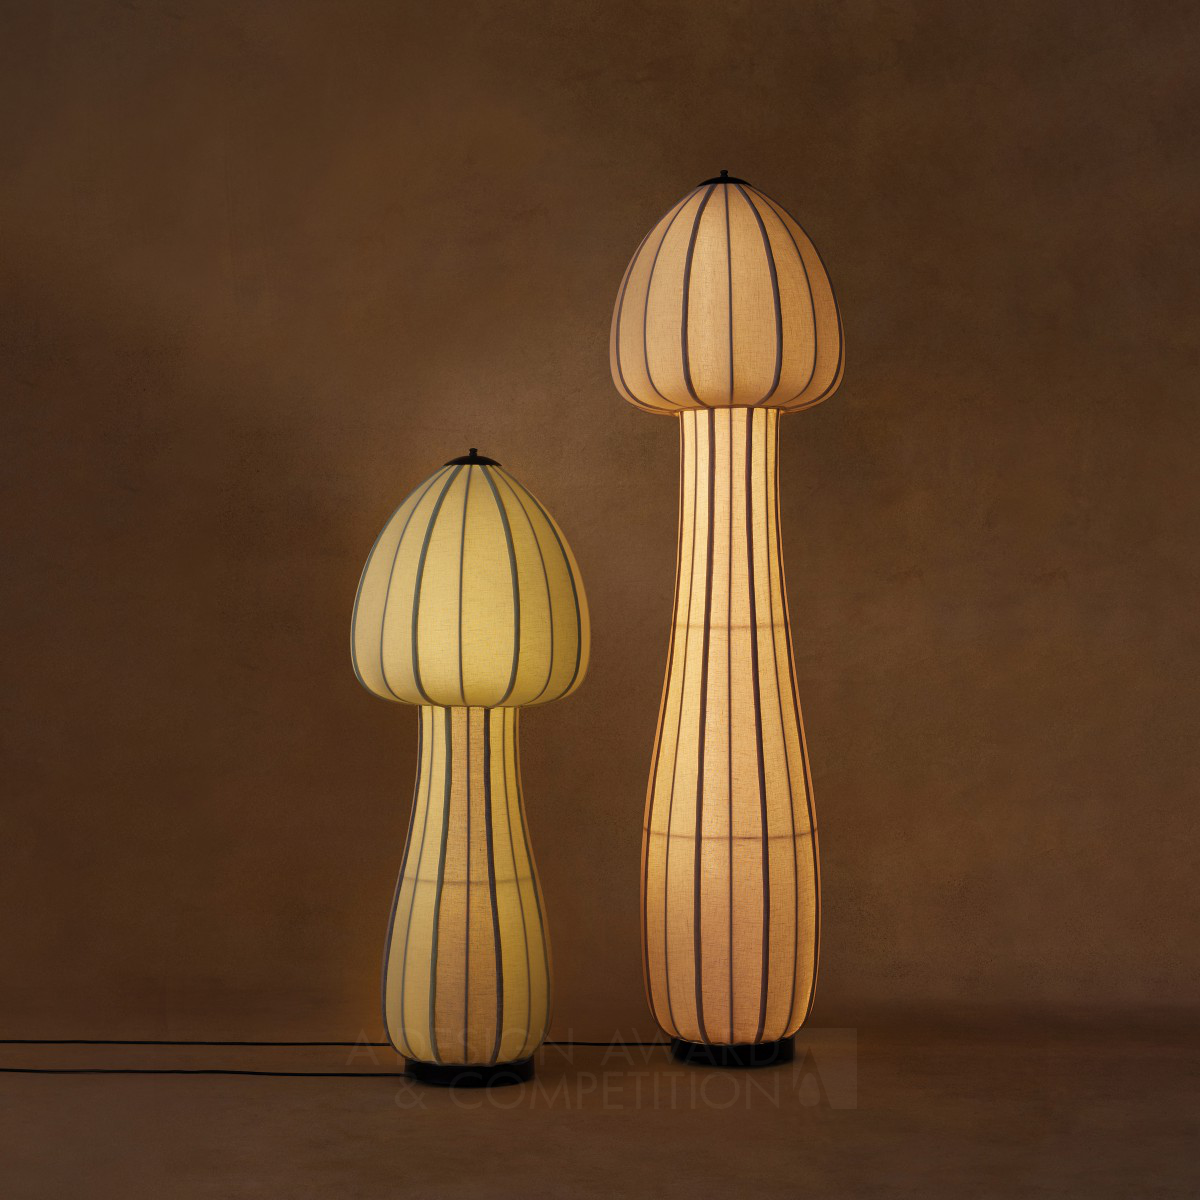 Priyam Doshi wins Iron at the prestigious A' Lighting Products and Fixtures Design Award with Mushroom Floor Lamps.